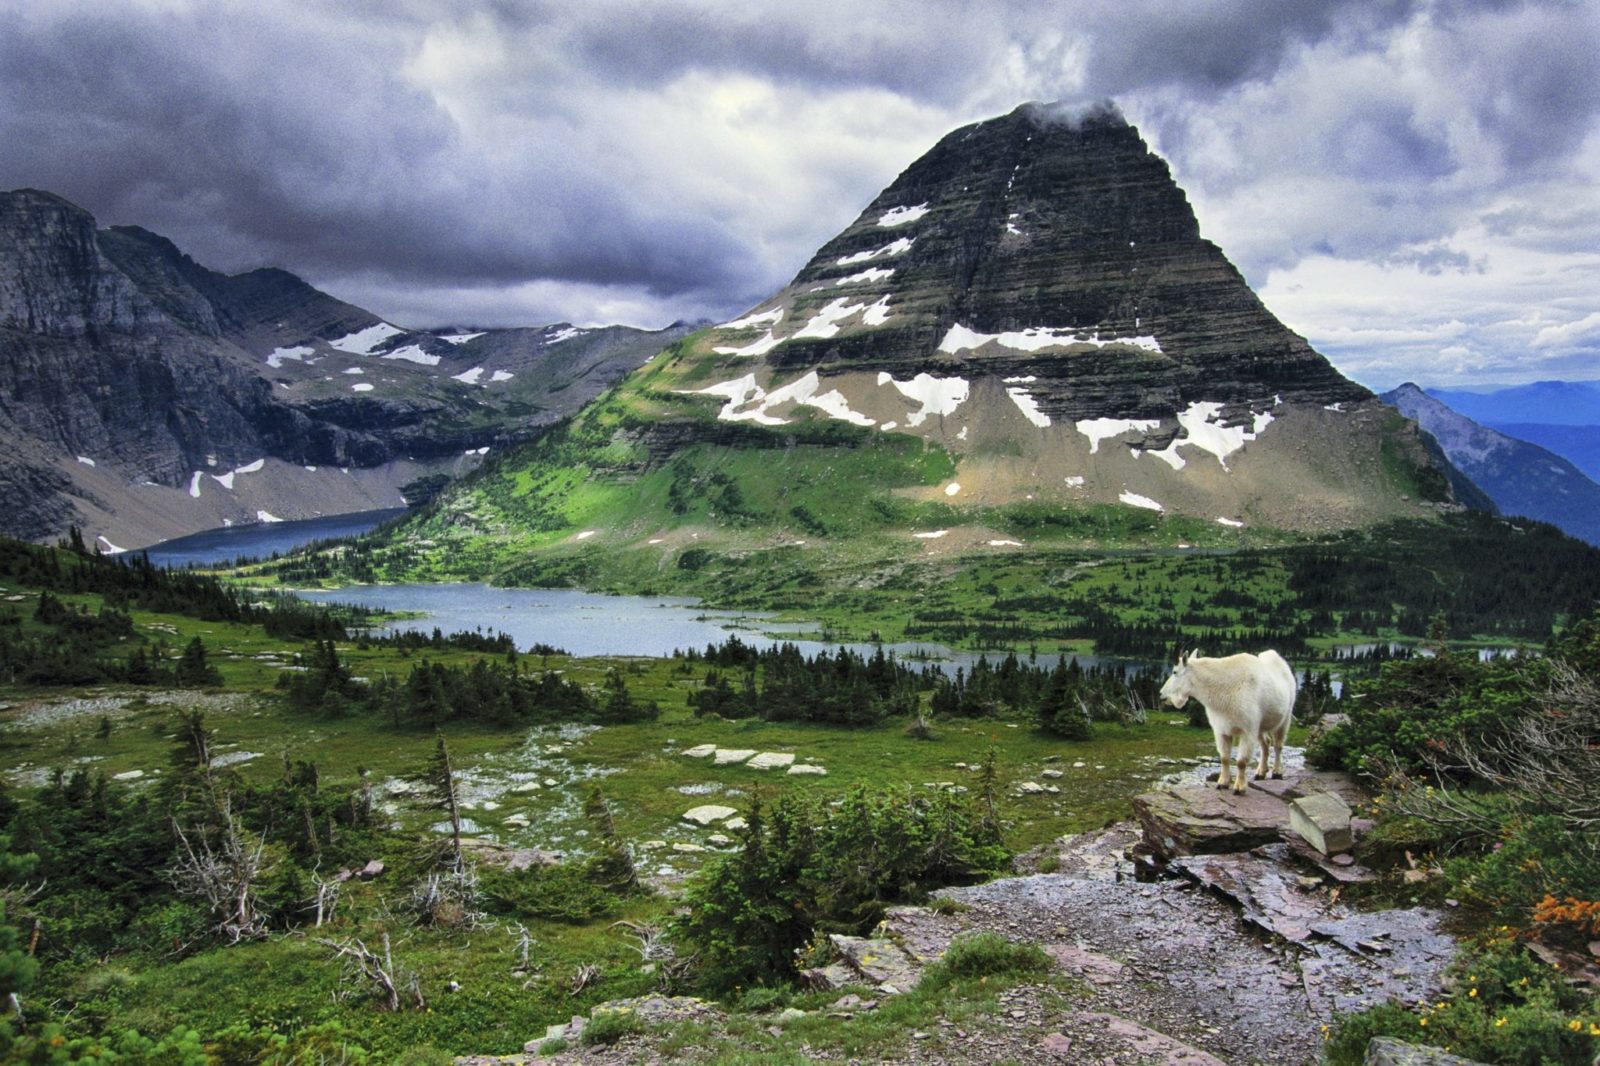 Mountain Goat (Oreamnos americanus), Glacier National Park, Montana
Glacier National Park is prime mountain goat habitat and the day I hiked the trail, this one miraculously appeared. He was kind enough to stand motionless for several moments allowing me to capture him and this spectacular view of Hidden Lake near Logan Pass, Montana.